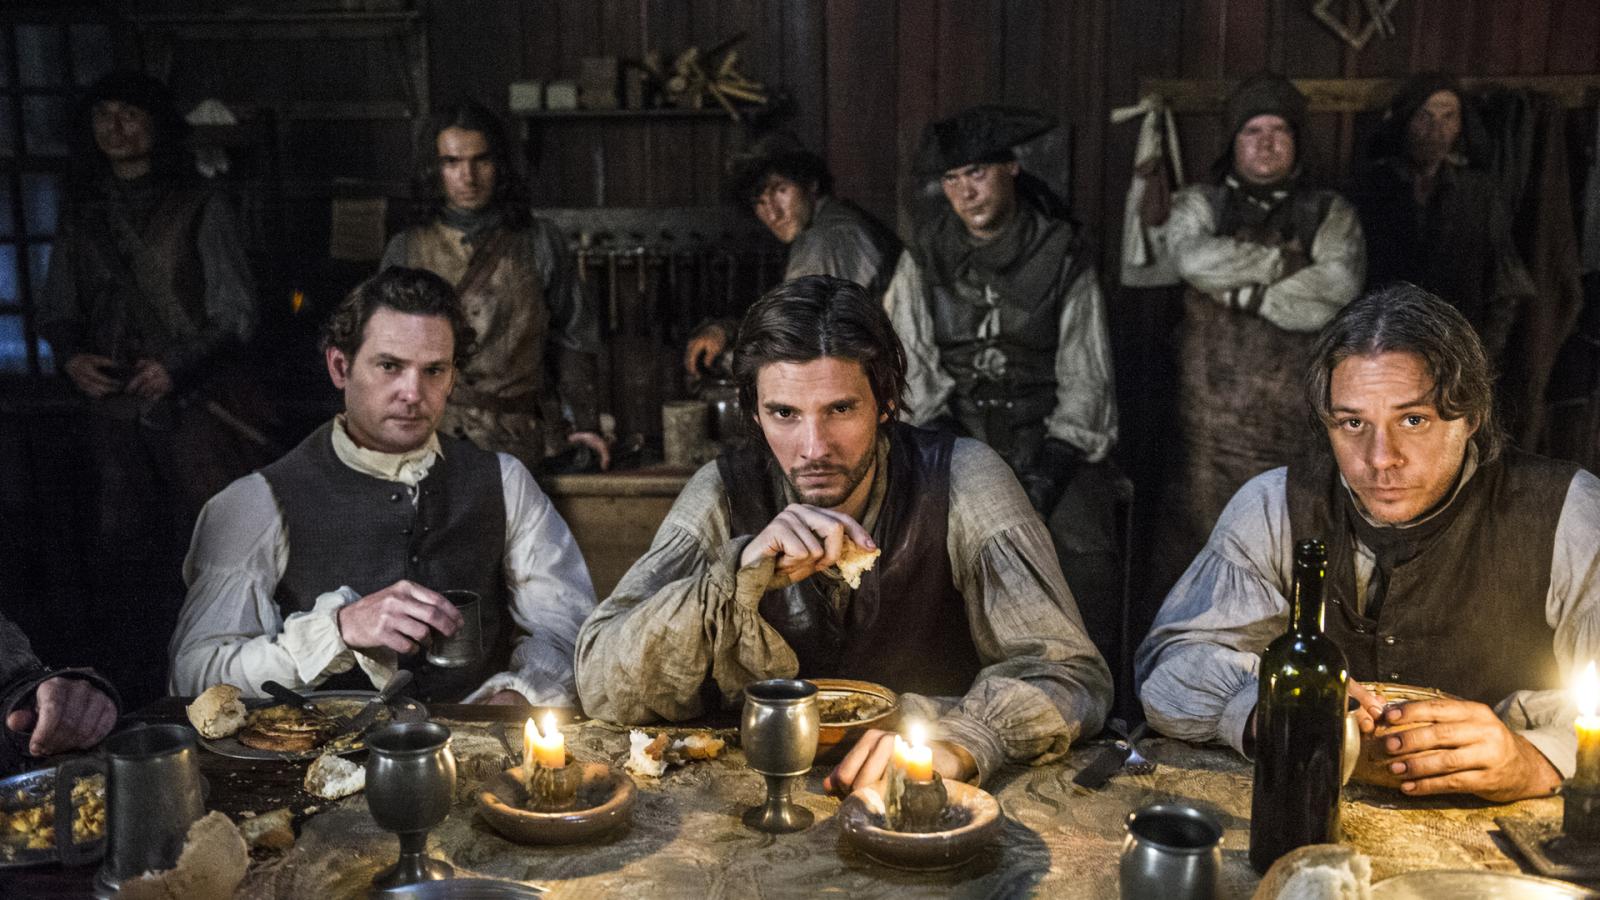 5 TV Shows About America's Colonial Era That Got Their History Right - image 2